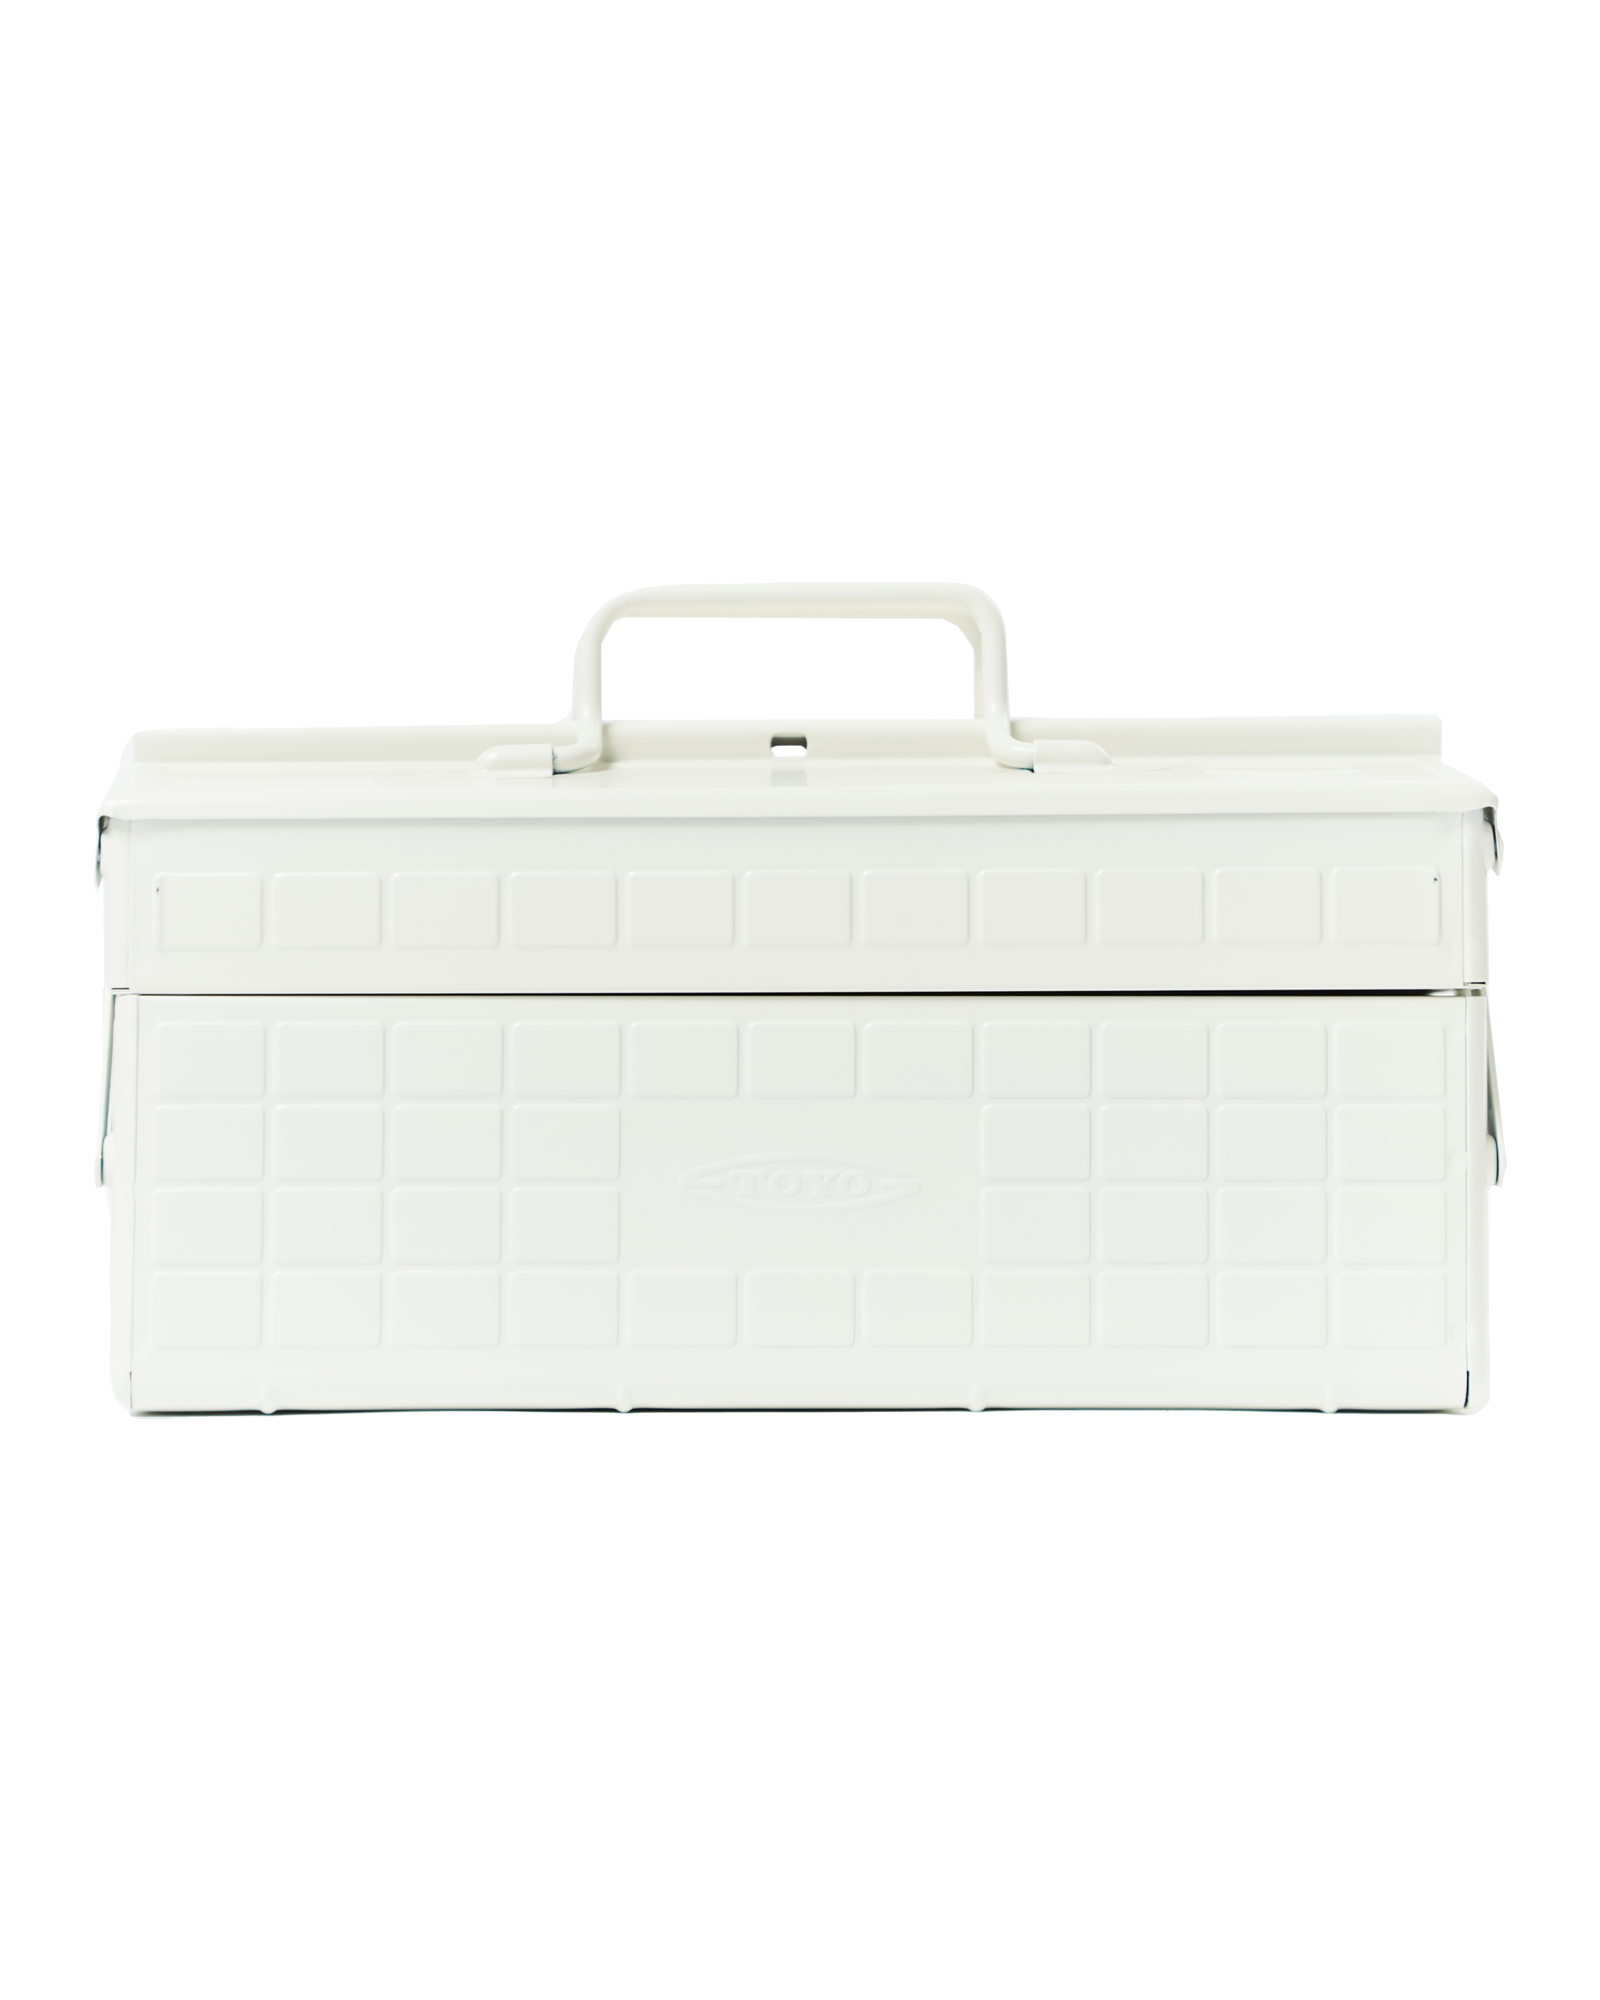 [RENTAL] TOYO Cantilever Toolbox ST-350 (White)